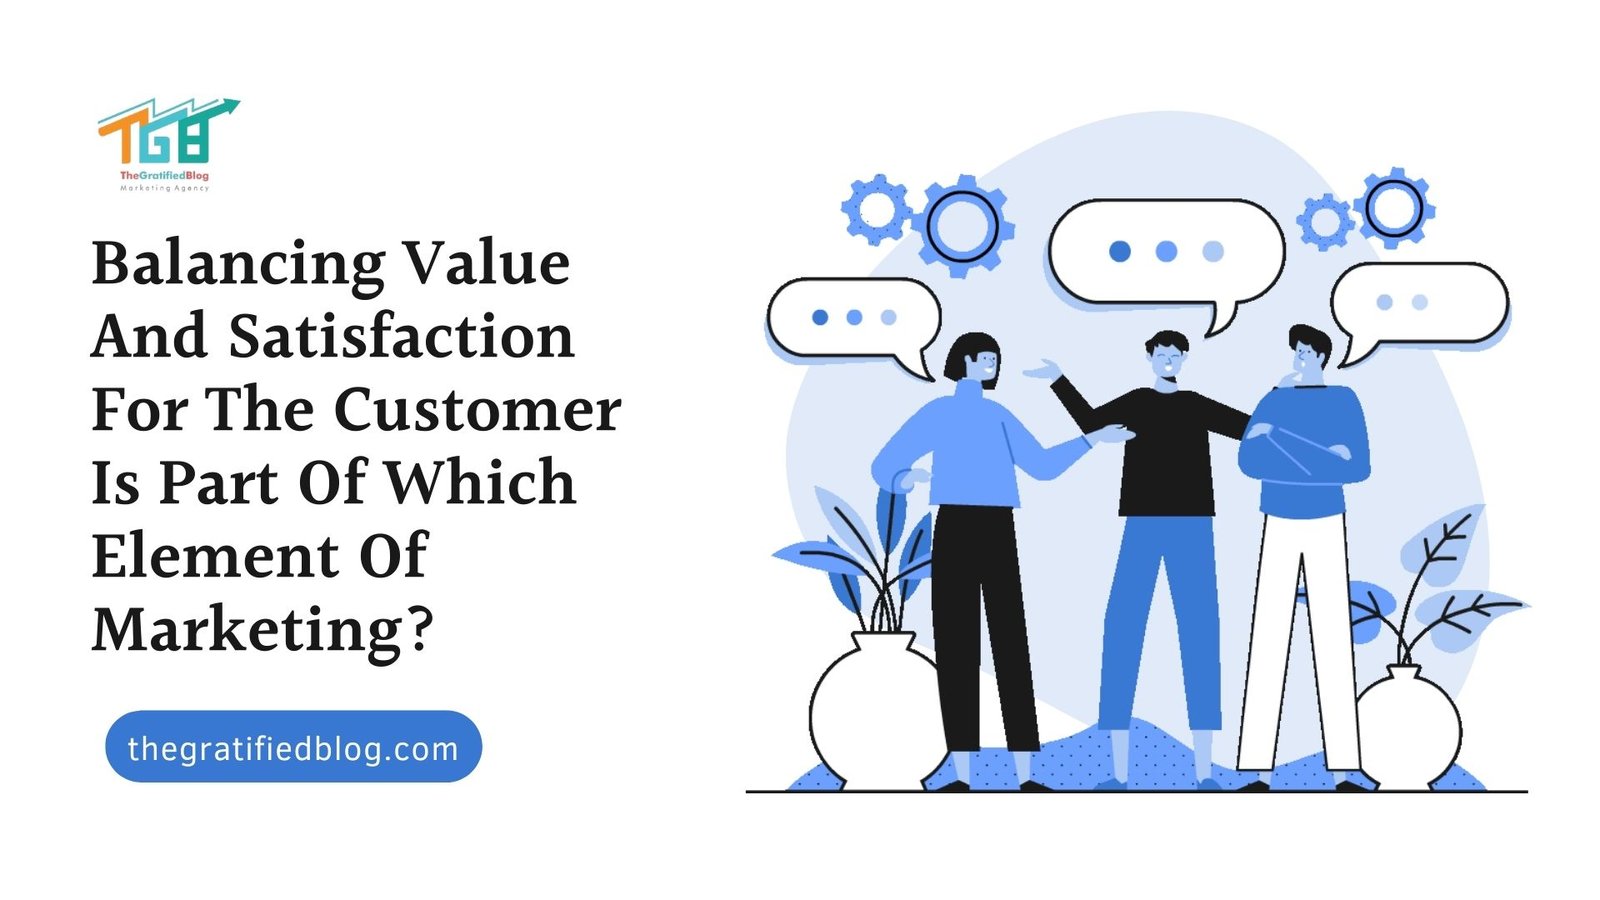 Balancing Value And Satisfaction for the Customer is Part of Which Element of Marketing?  : Enhancing Customer Experiences.